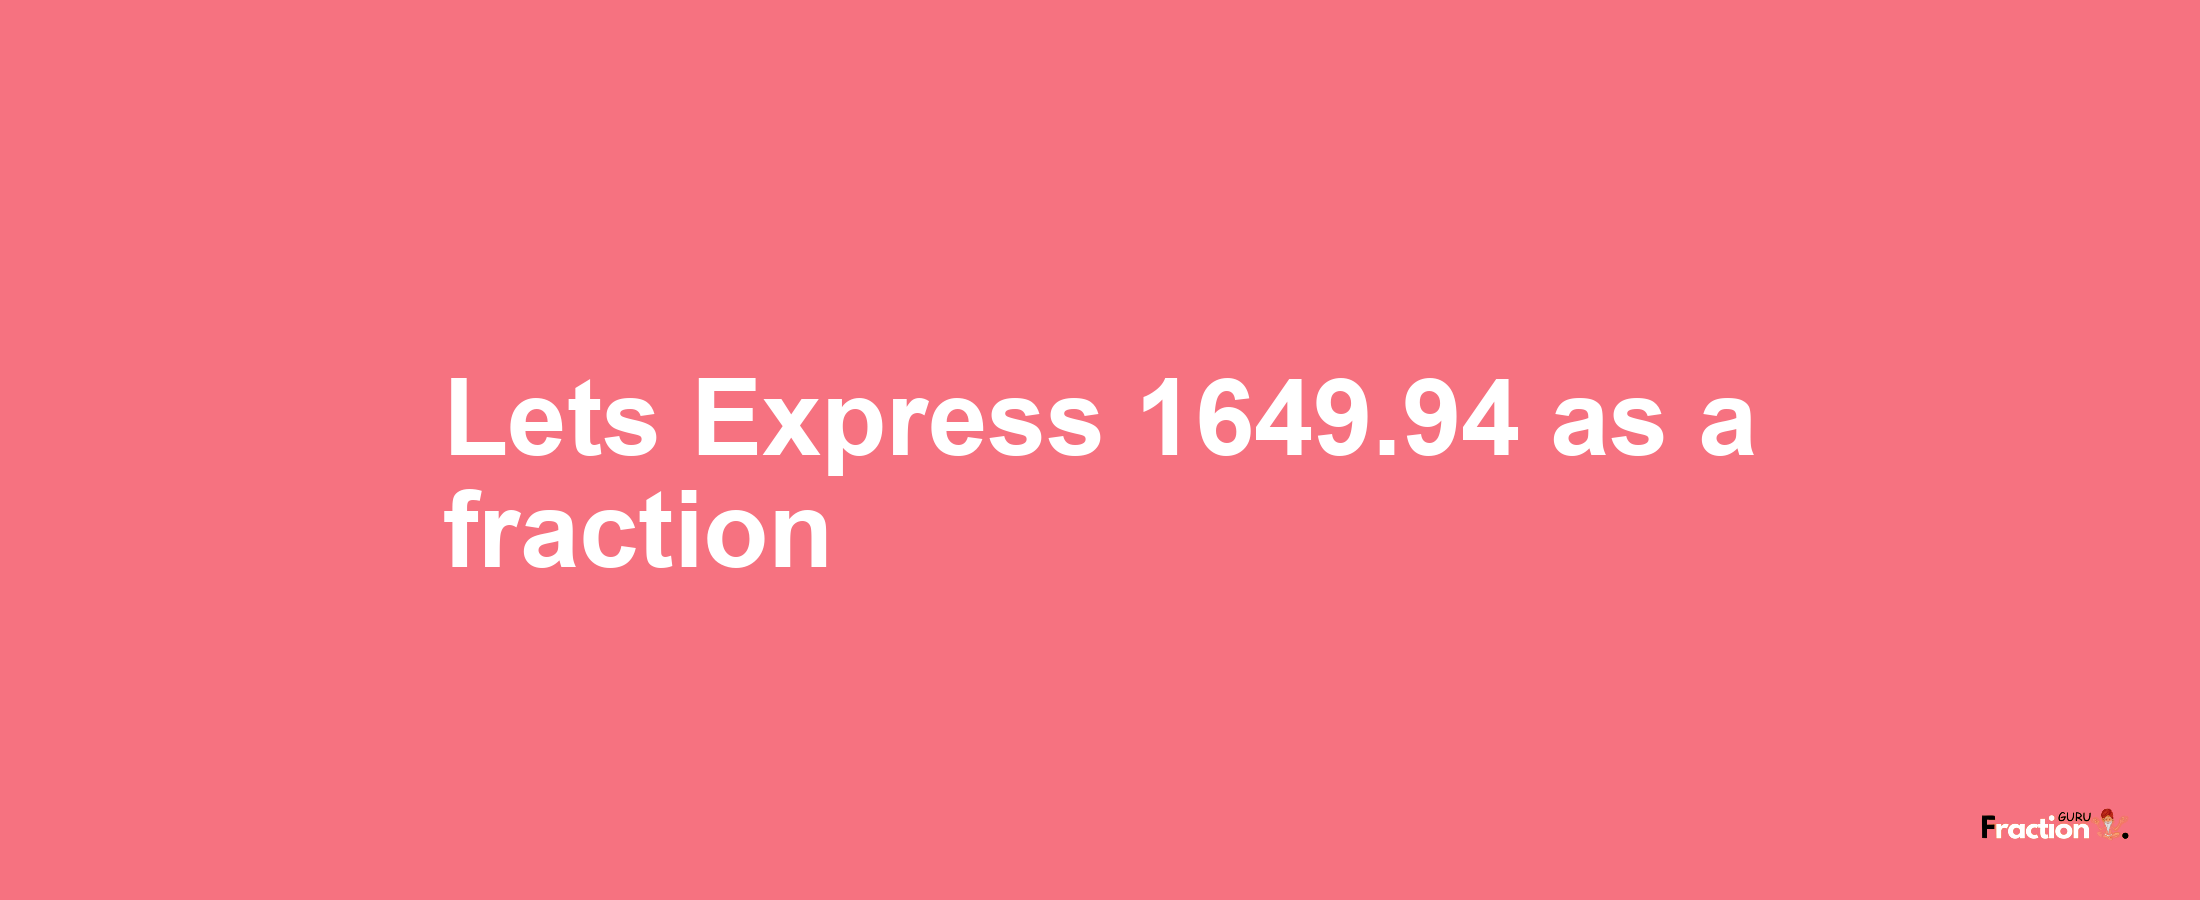 Lets Express 1649.94 as afraction